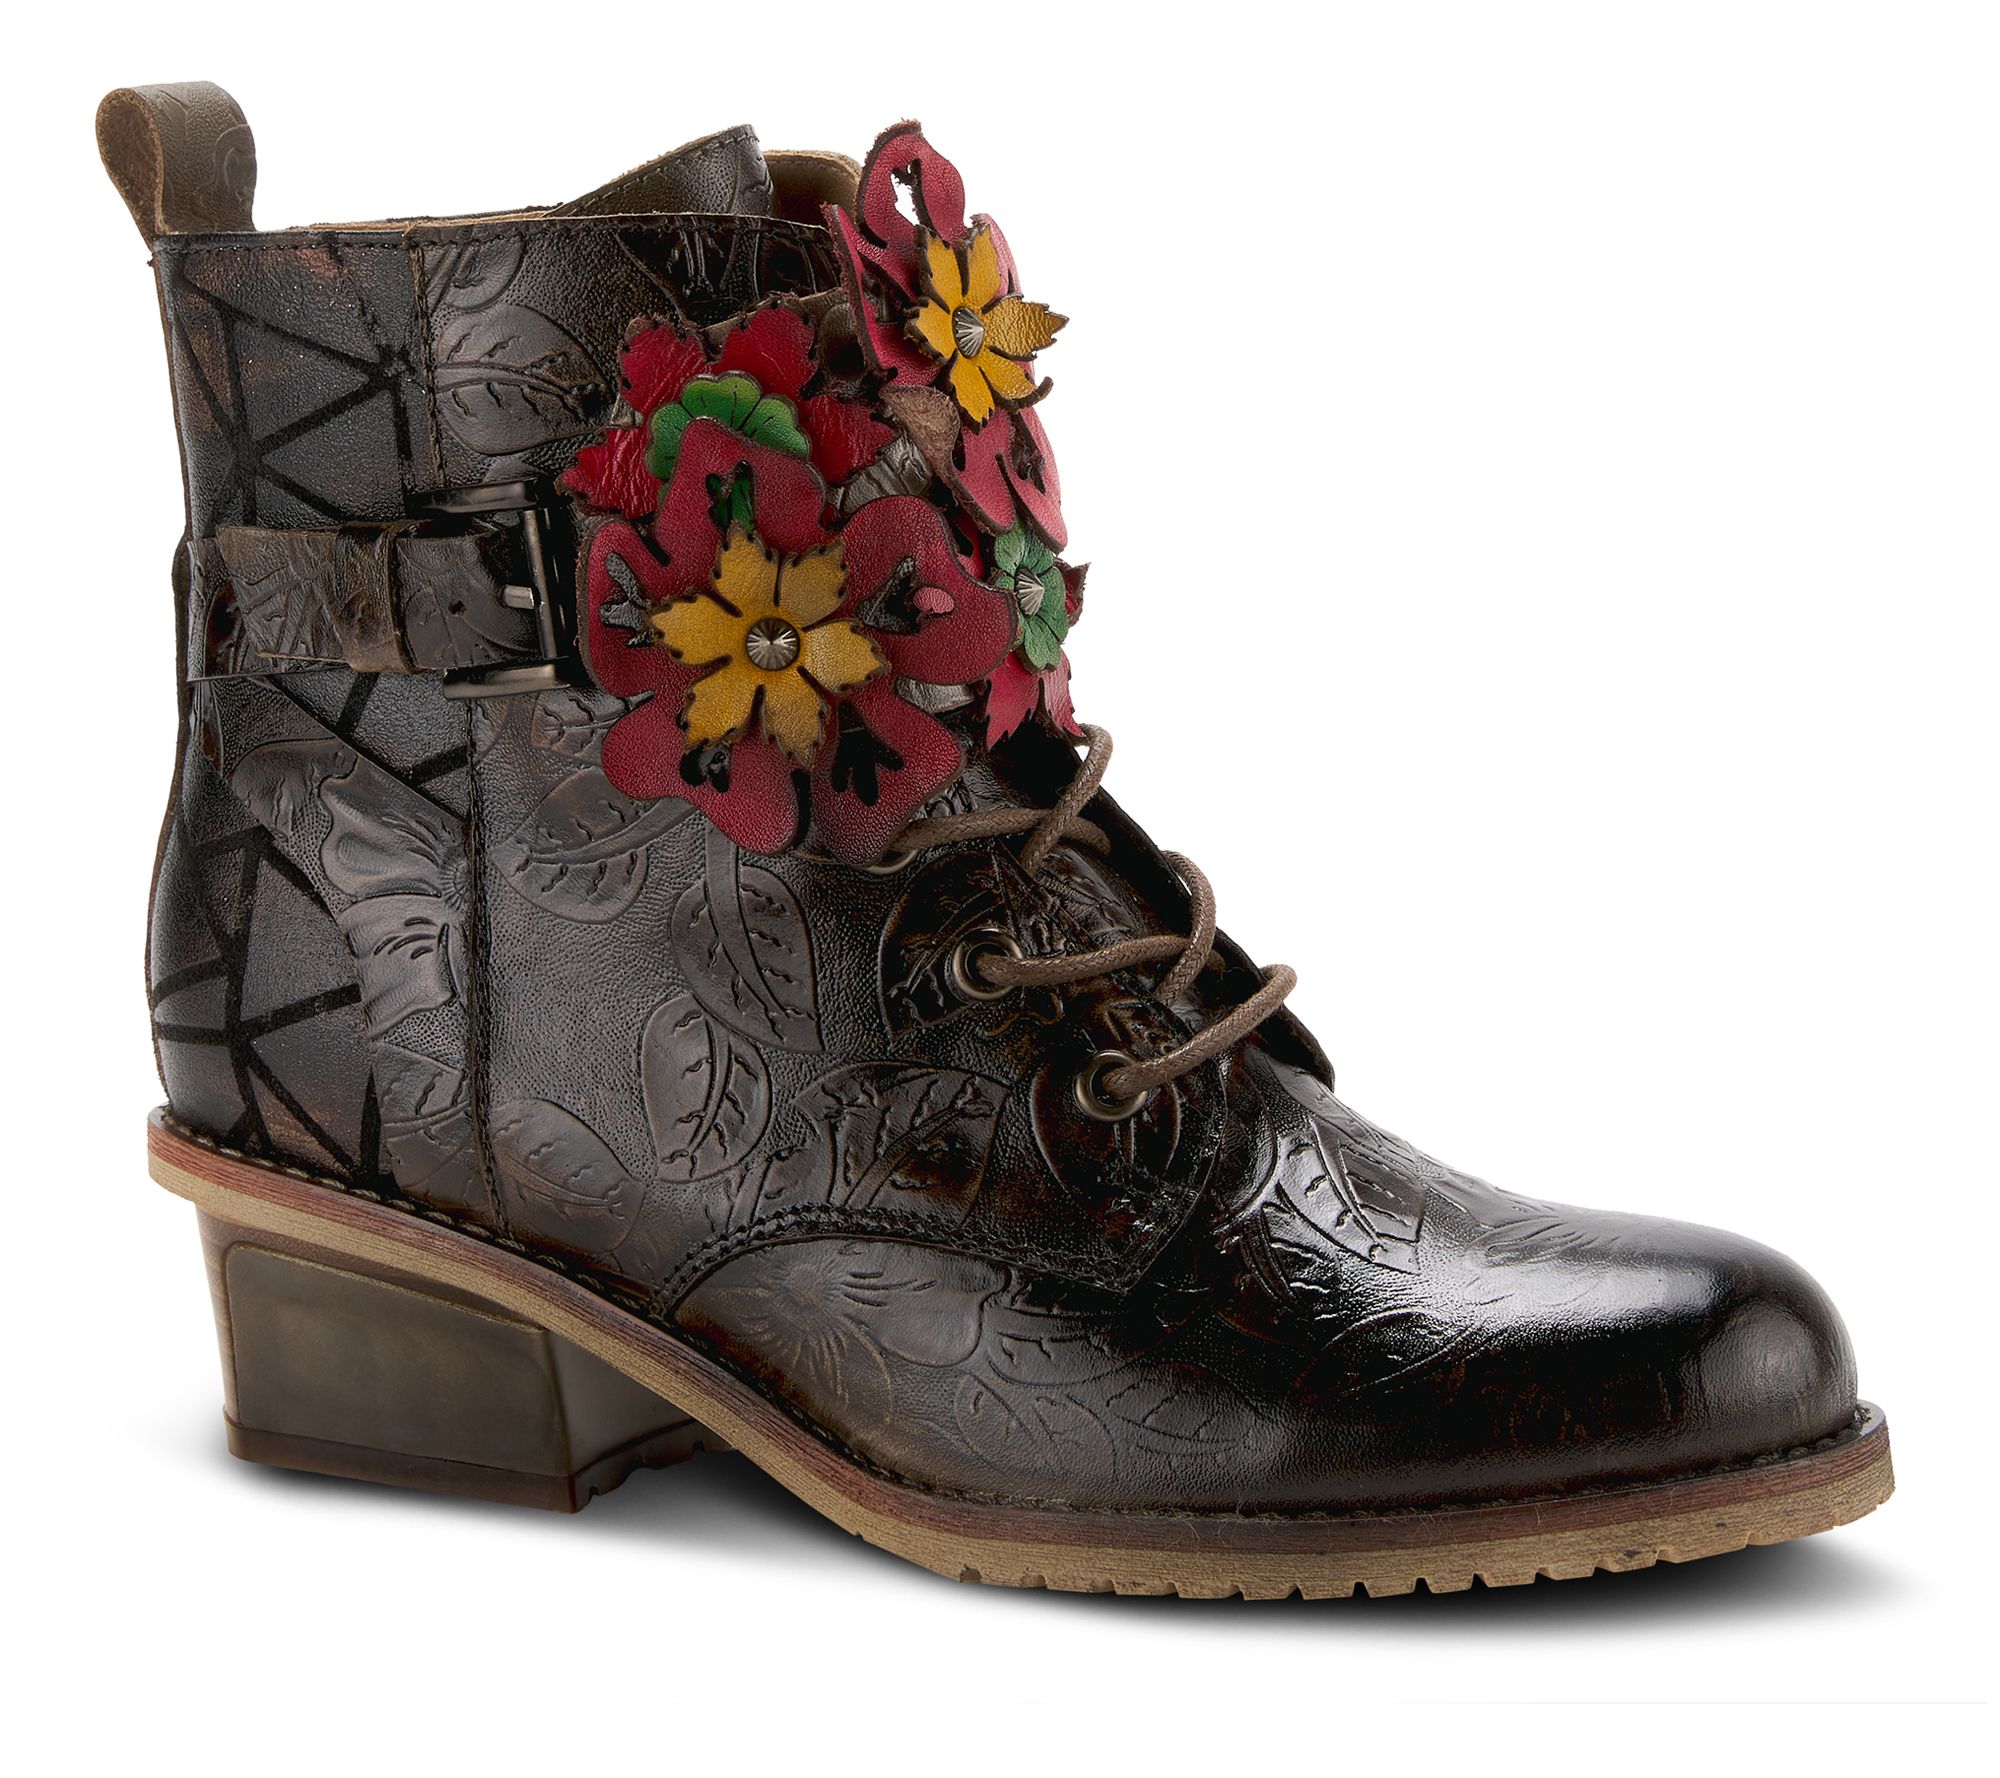 L'Artiste by Spring Step Leather Booties - Groovie - QVC.com